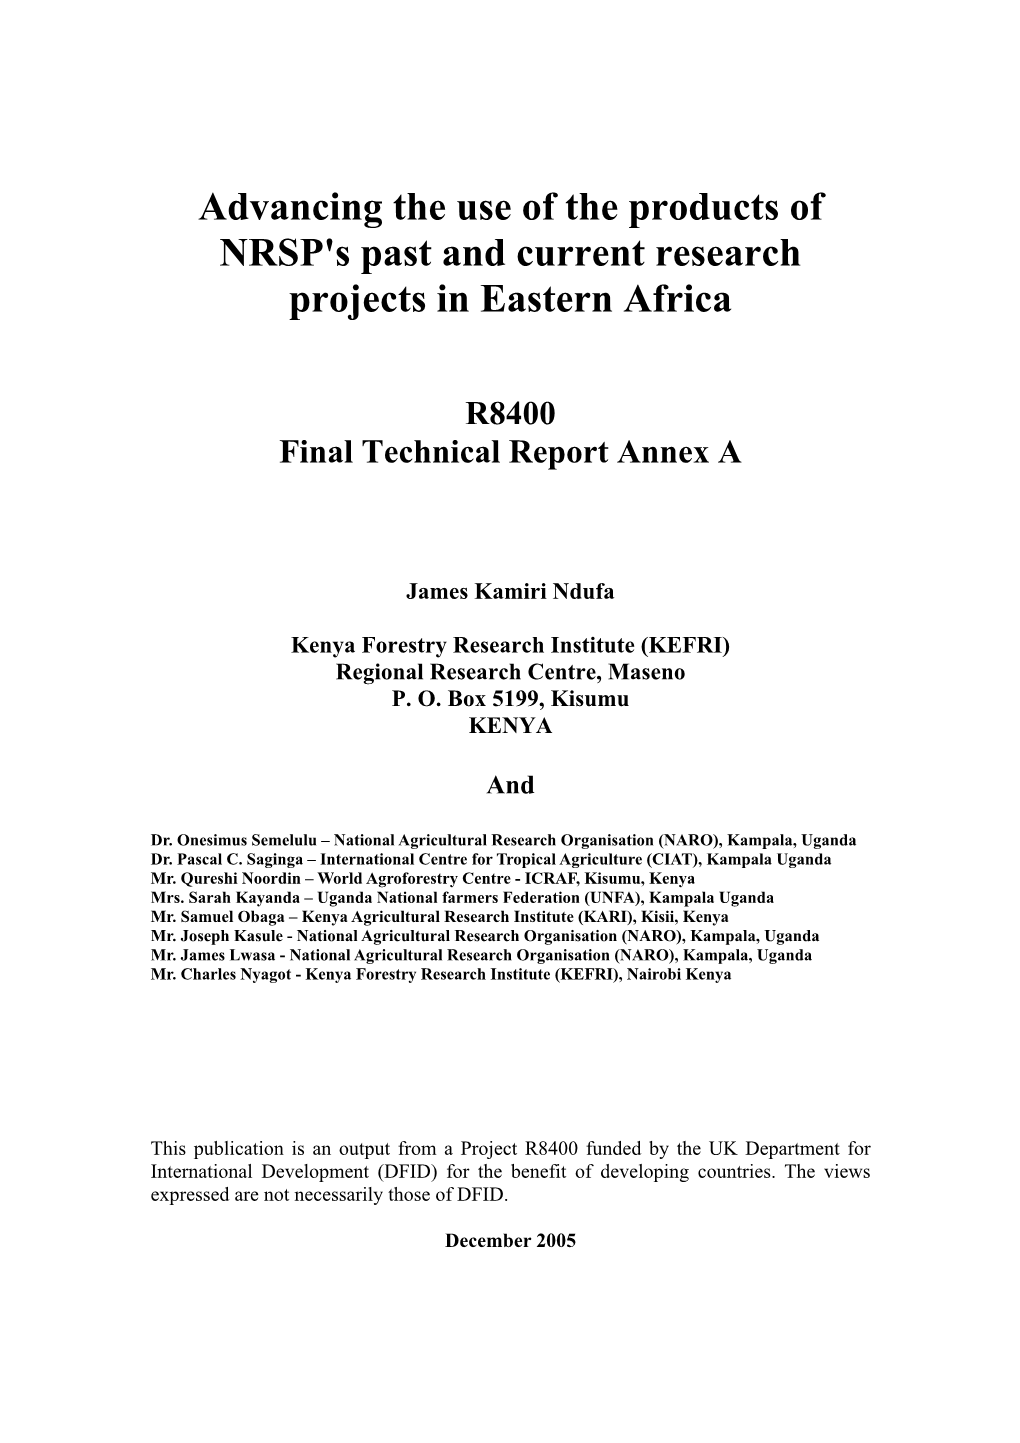 Advancing the Use of the Products of NRSP's Past and Current Research Projects in Eastern Africa